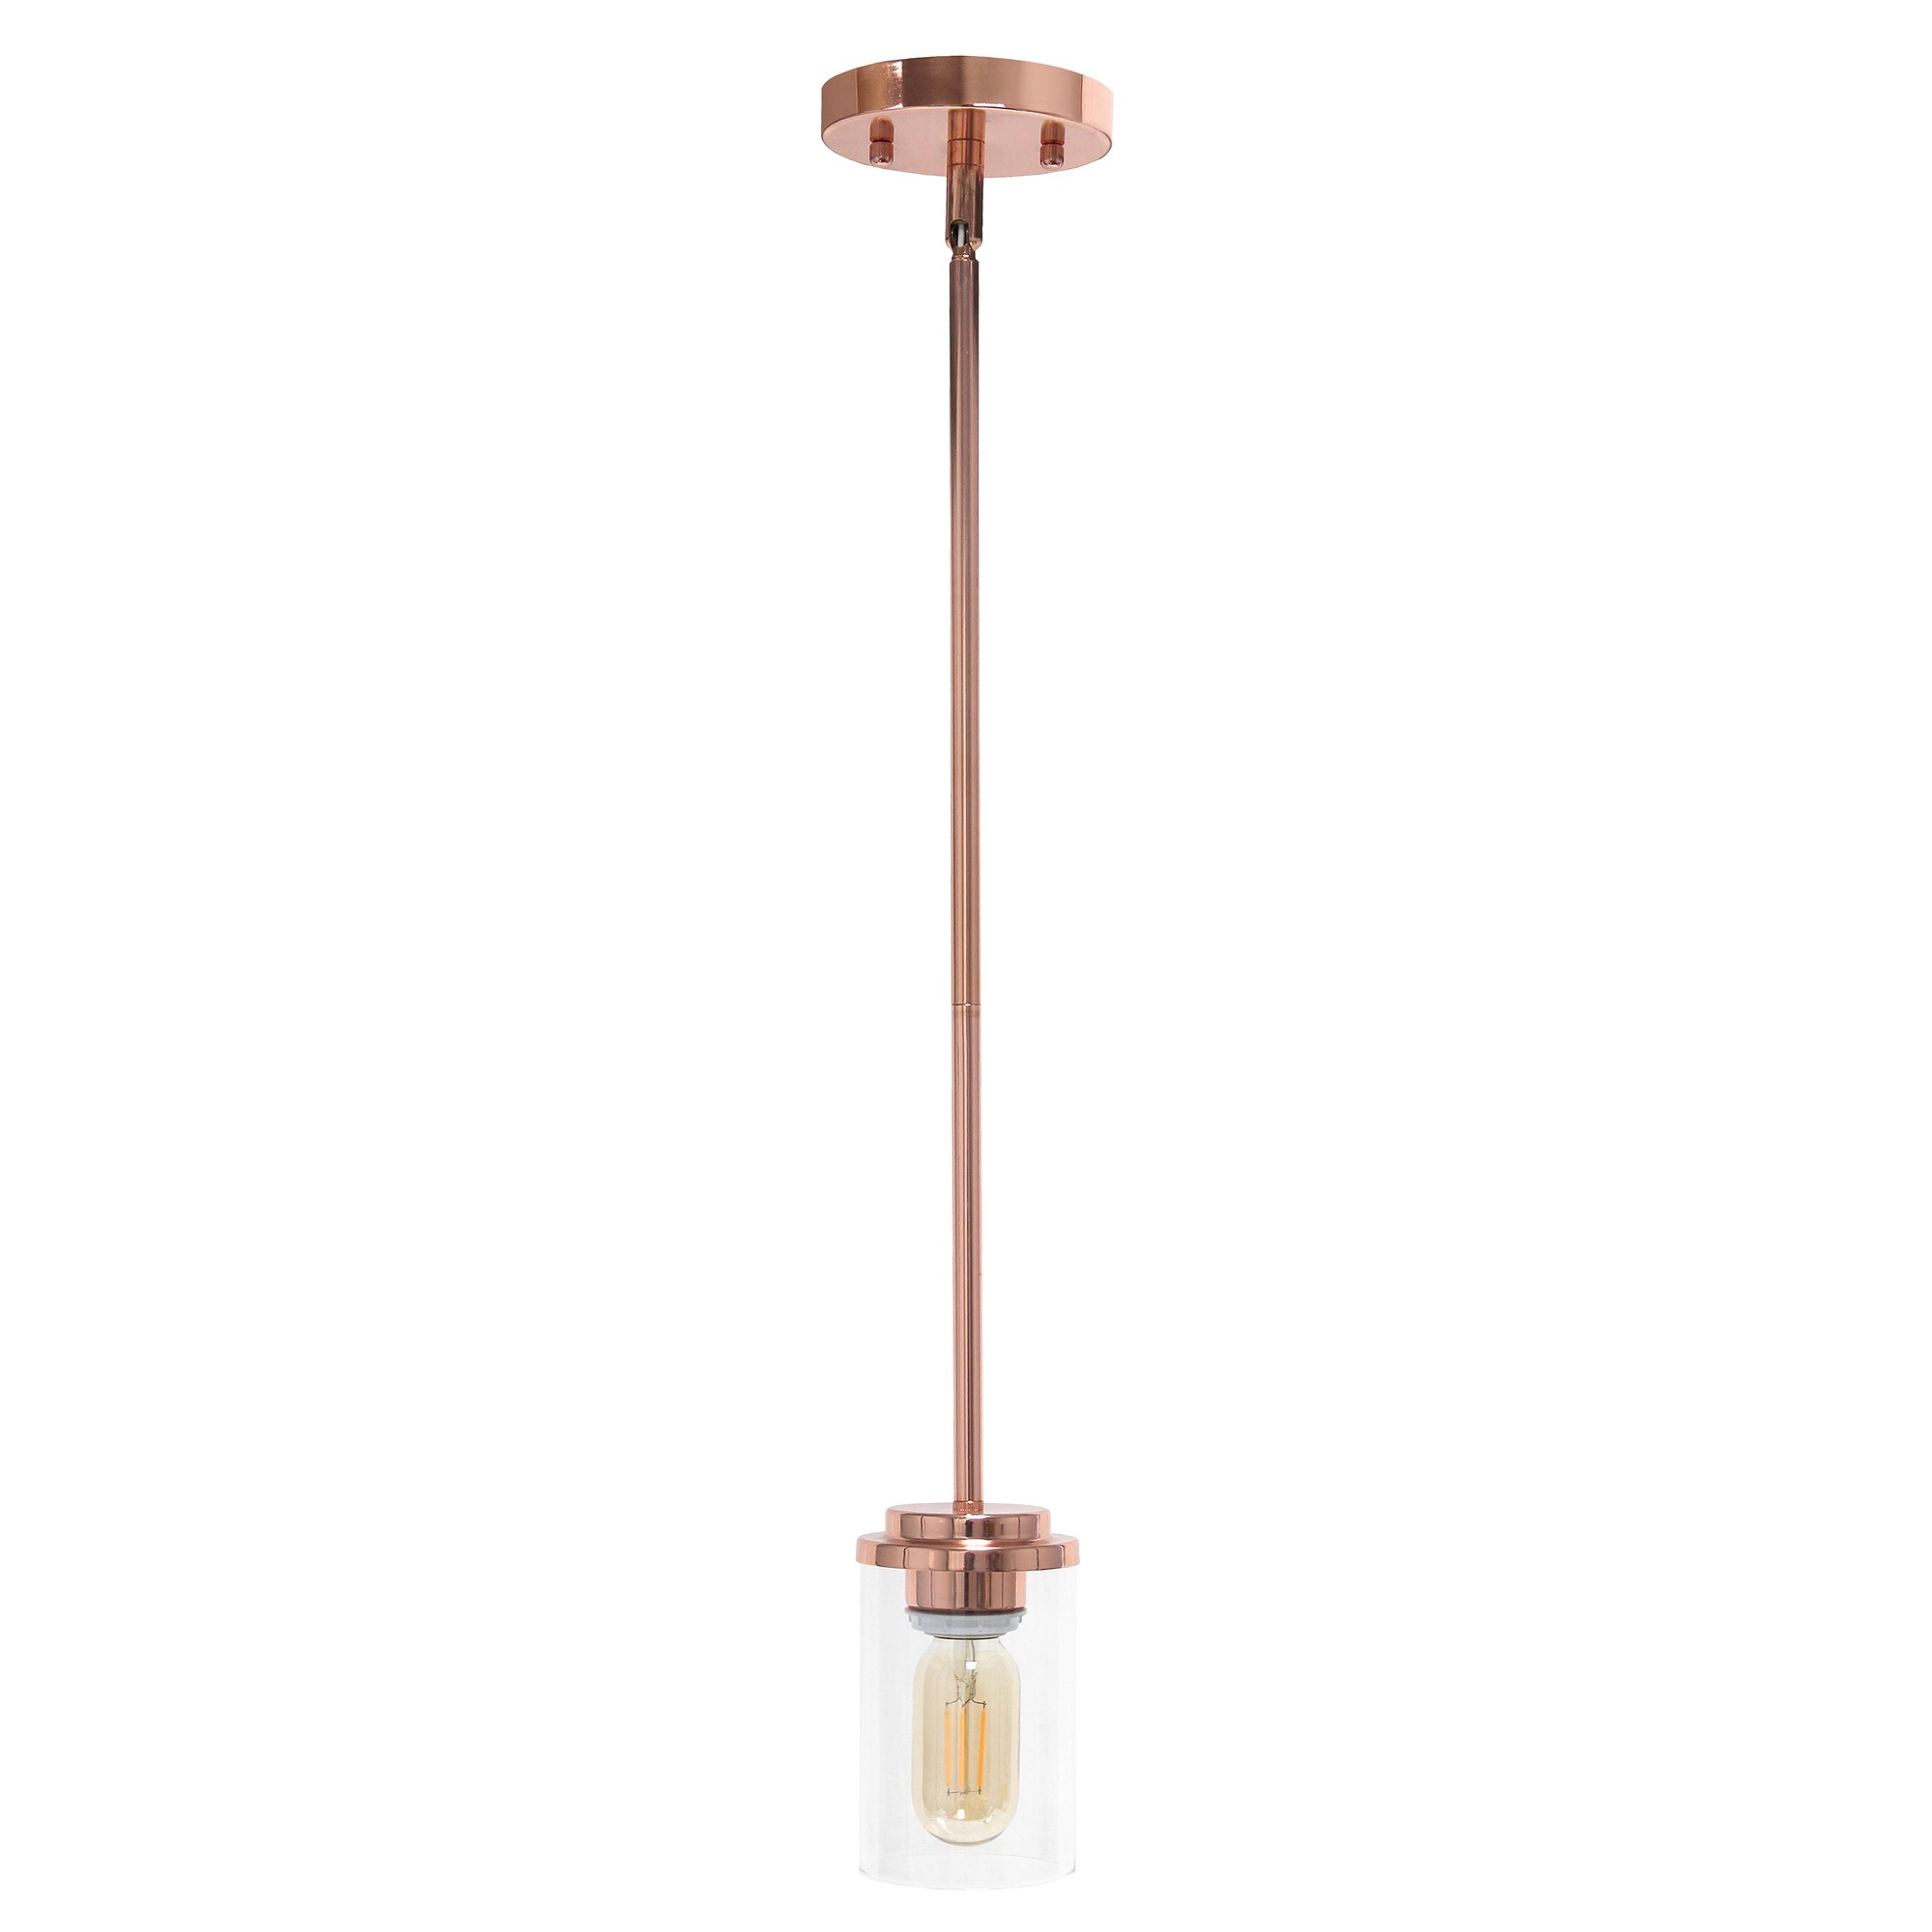 Lalia Home 1-Light 5.75" Minimalist Industrial Farmhouse Adjustable Hanging Clear Cylinder Glass Pendant Fixture, Rose Gold